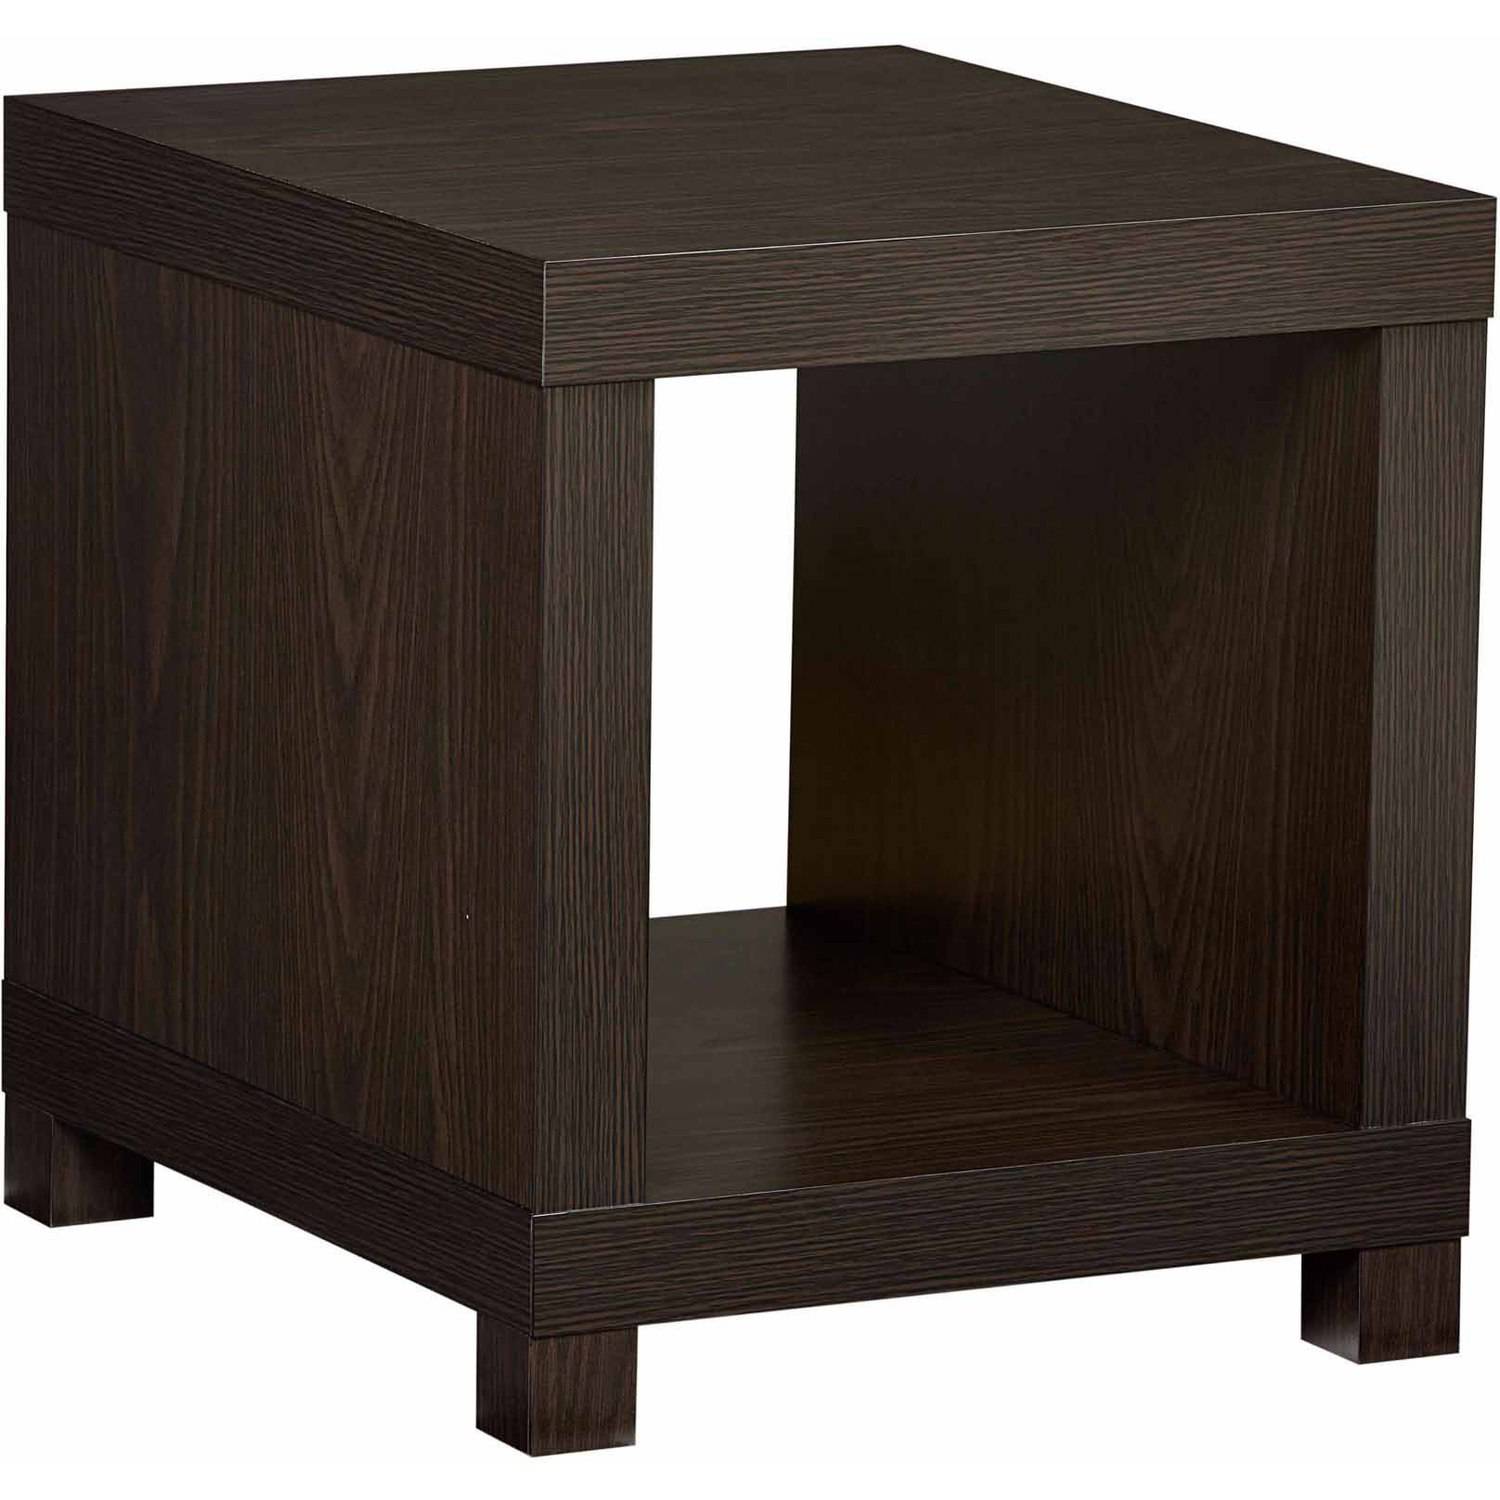 Better Homes & Gardens Accent Table, Espresso - image 1 of 5